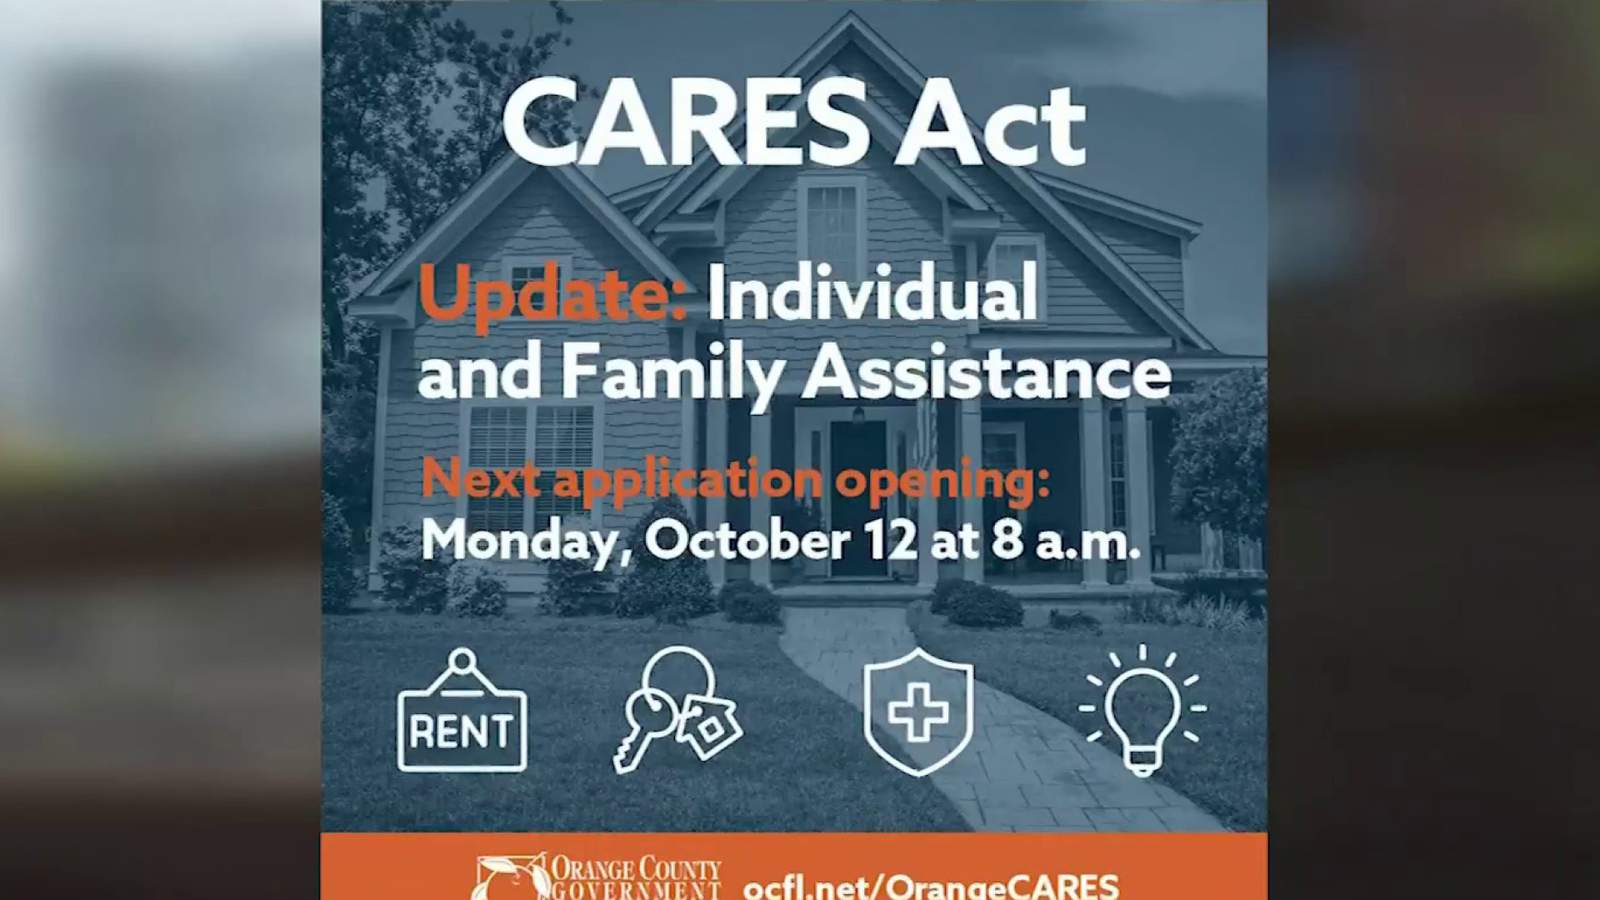 Orange County CARES Act portal closes in less than hour